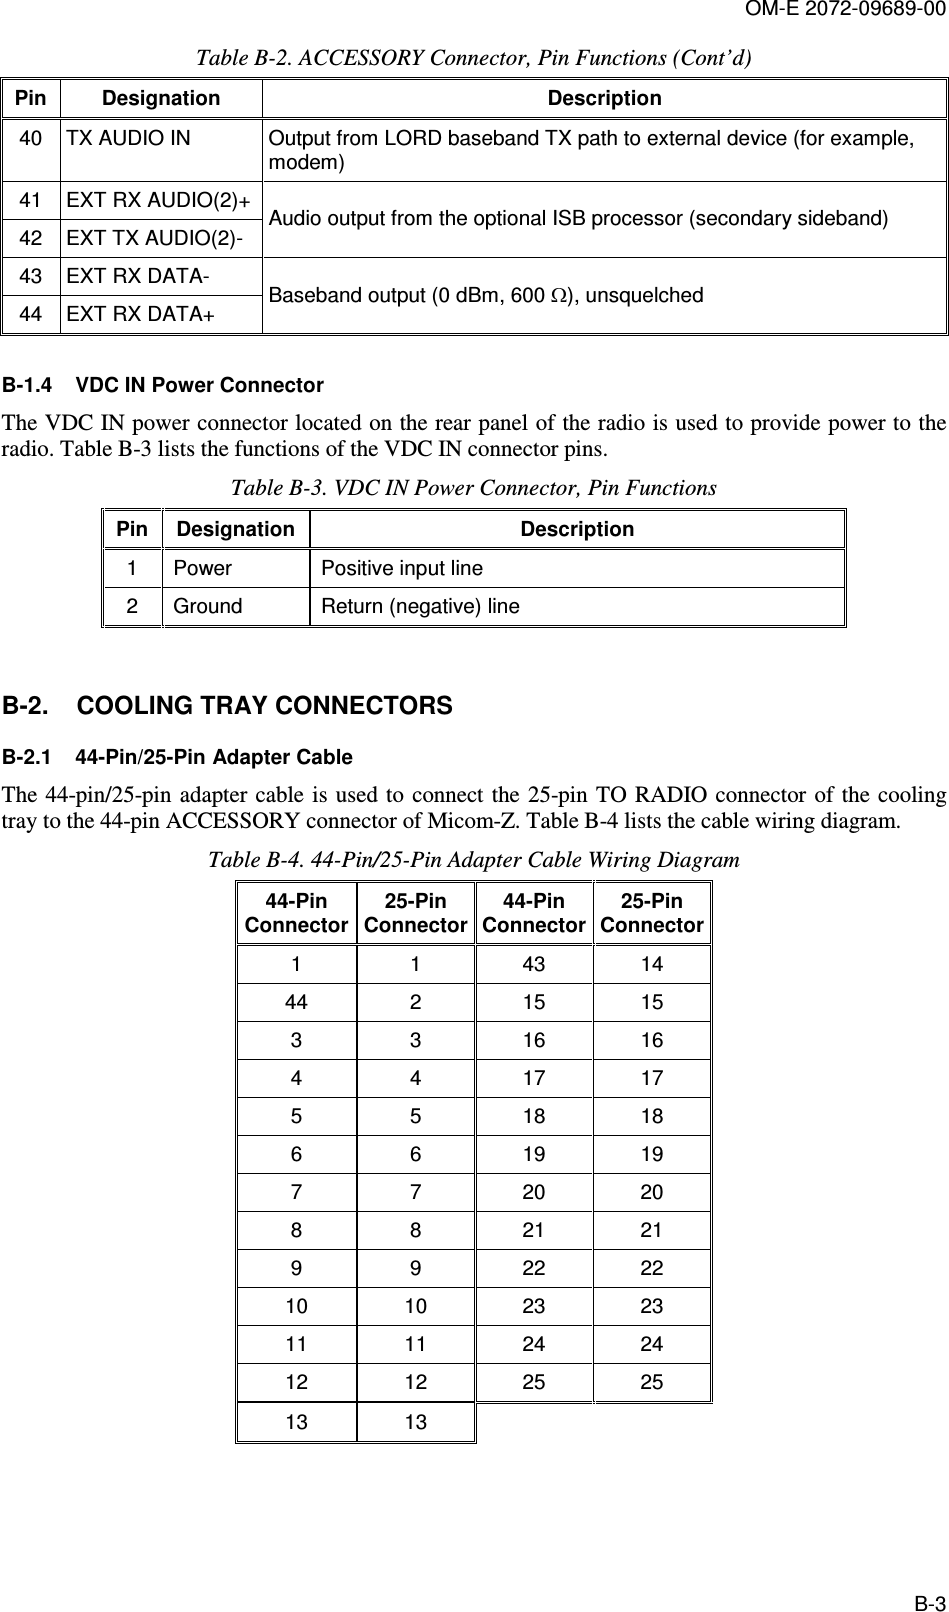 OM-E 2072-09689-00 B-3 Table  B-2. ACCESSORY Connector, Pin Functions (Cont’d)  Pin  Designation  Description 40  TX AUDIO IN  Output from LORD baseband TX path to external device (for example, modem) 41  EXT RX AUDIO(2)+ 42  EXT TX AUDIO(2)-  Audio output from the optional ISB processor (secondary sideband) 43  EXT RX DATA- 44  EXT RX DATA+  Baseband output (0 dBm, 600 Ω), unsquelched  B-1.4  VDC IN Power Connector  The VDC IN power connector located on the rear panel of the radio is used to provide power to the radio. Table  B-3 lists the functions of the VDC IN connector pins. Table  B-3. VDC IN Power Connector, Pin Functions Pin  Designation  Description 1   Power  Positive input line 2   Ground  Return (negative) line   B-2.  COOLING TRAY CONNECTORS  B-2.1  44-Pin/25-Pin Adapter Cable The 44-pin/25-pin adapter cable  is used to  connect the 25-pin  TO RADIO  connector  of the  cooling tray to the 44-pin ACCESSORY connector of Micom-Z. Table  B-4 lists the cable wiring diagram. Table  B-4. 44-Pin/25-Pin Adapter Cable Wiring Diagram 44-Pin Connector 25-Pin Connector 44-Pin Connector 25-Pin Connector 1   1  43  14 44  2  15  15 3  3  16  16 4  4  17  17 5  5  18  18 6  6  19  19 7  7  20  20 8  8  21  21 9  9  22  22 10  10  23  23 11  11  24  24 12  12  25  25 13  13      